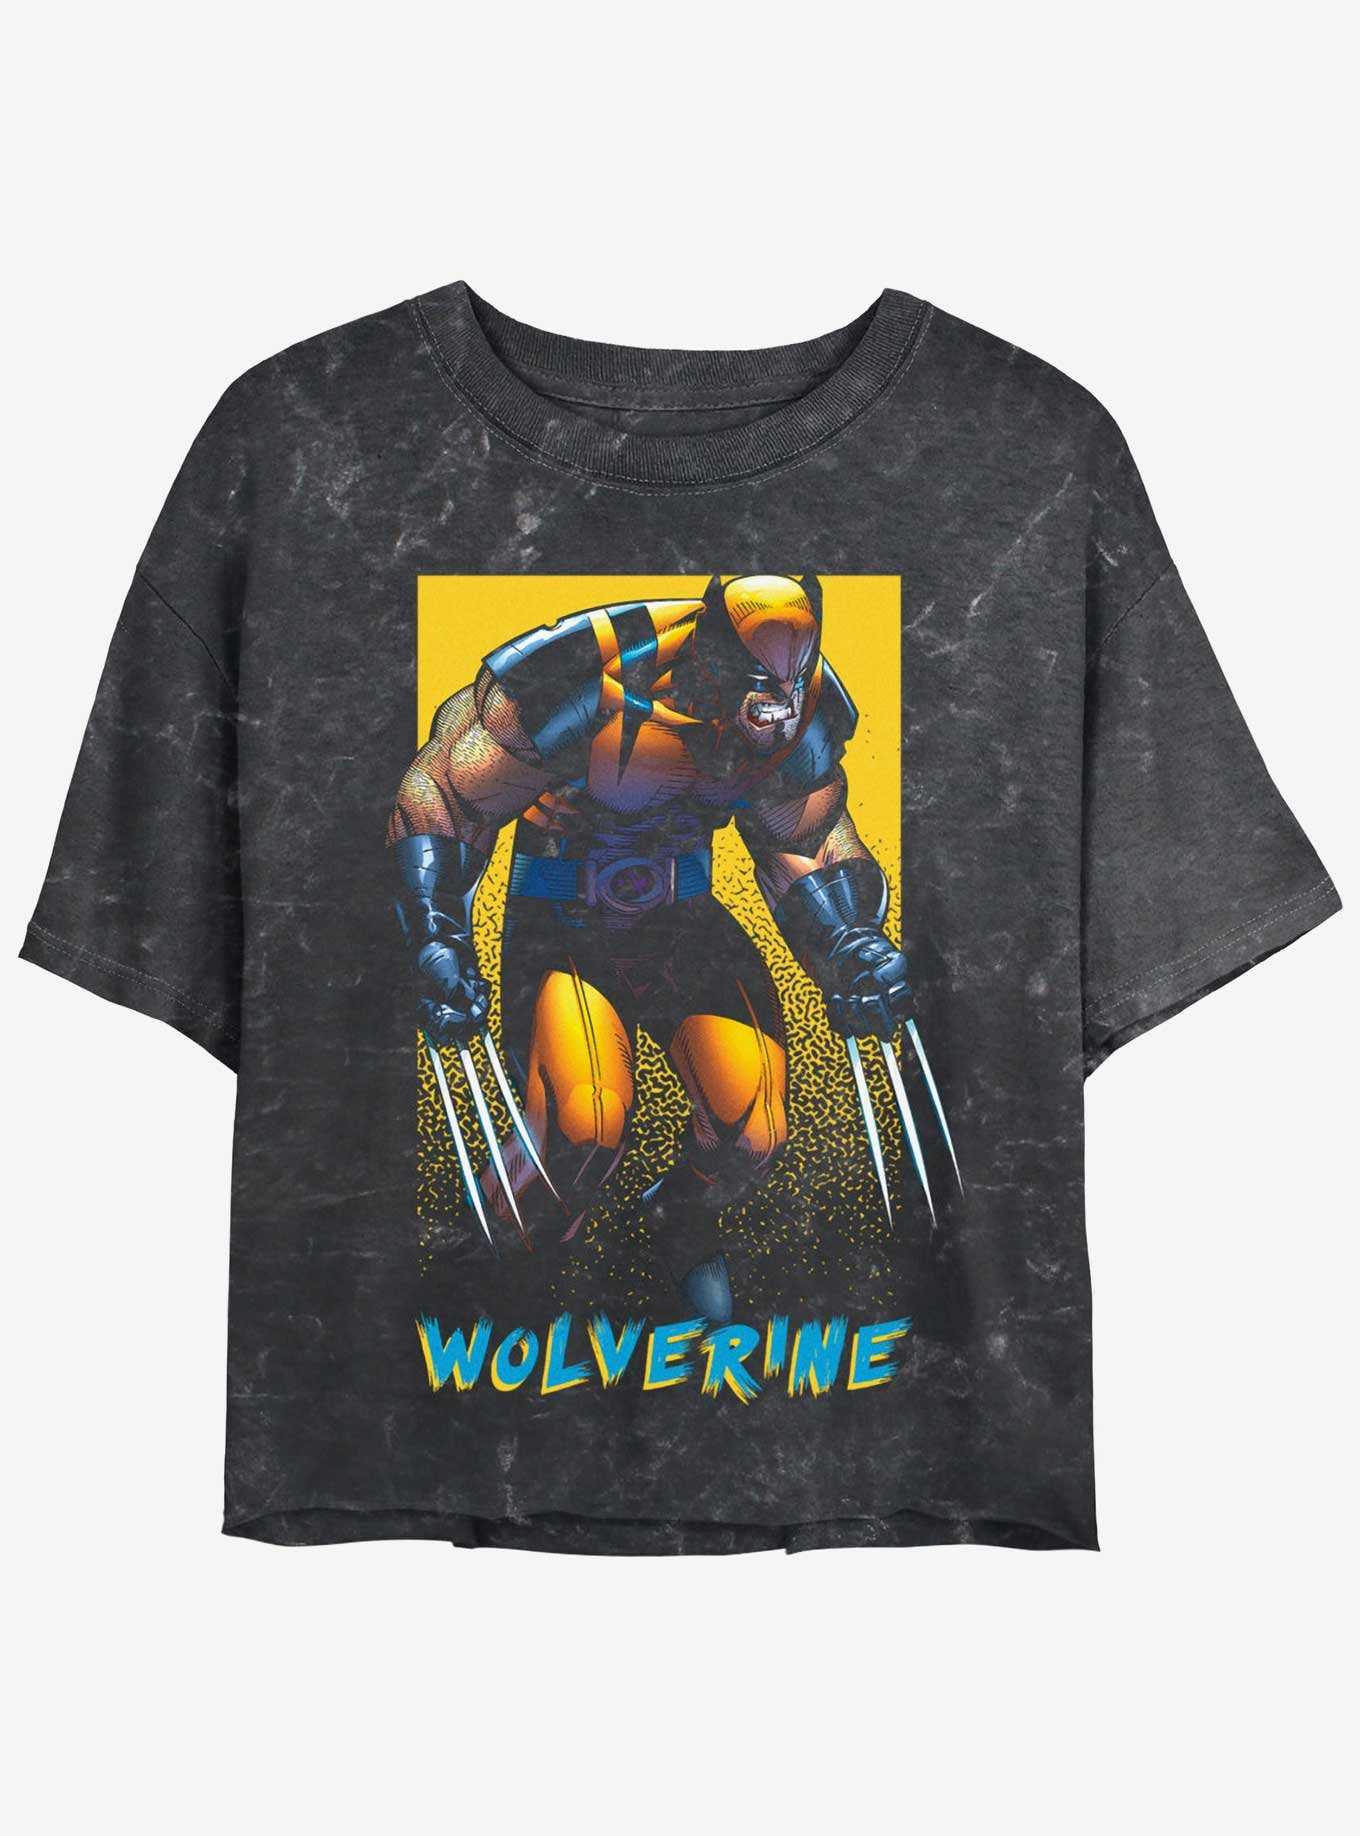 Wolverine Claws Out Poster Girls Mineral Wash Crop T-Shirt, , hi-res